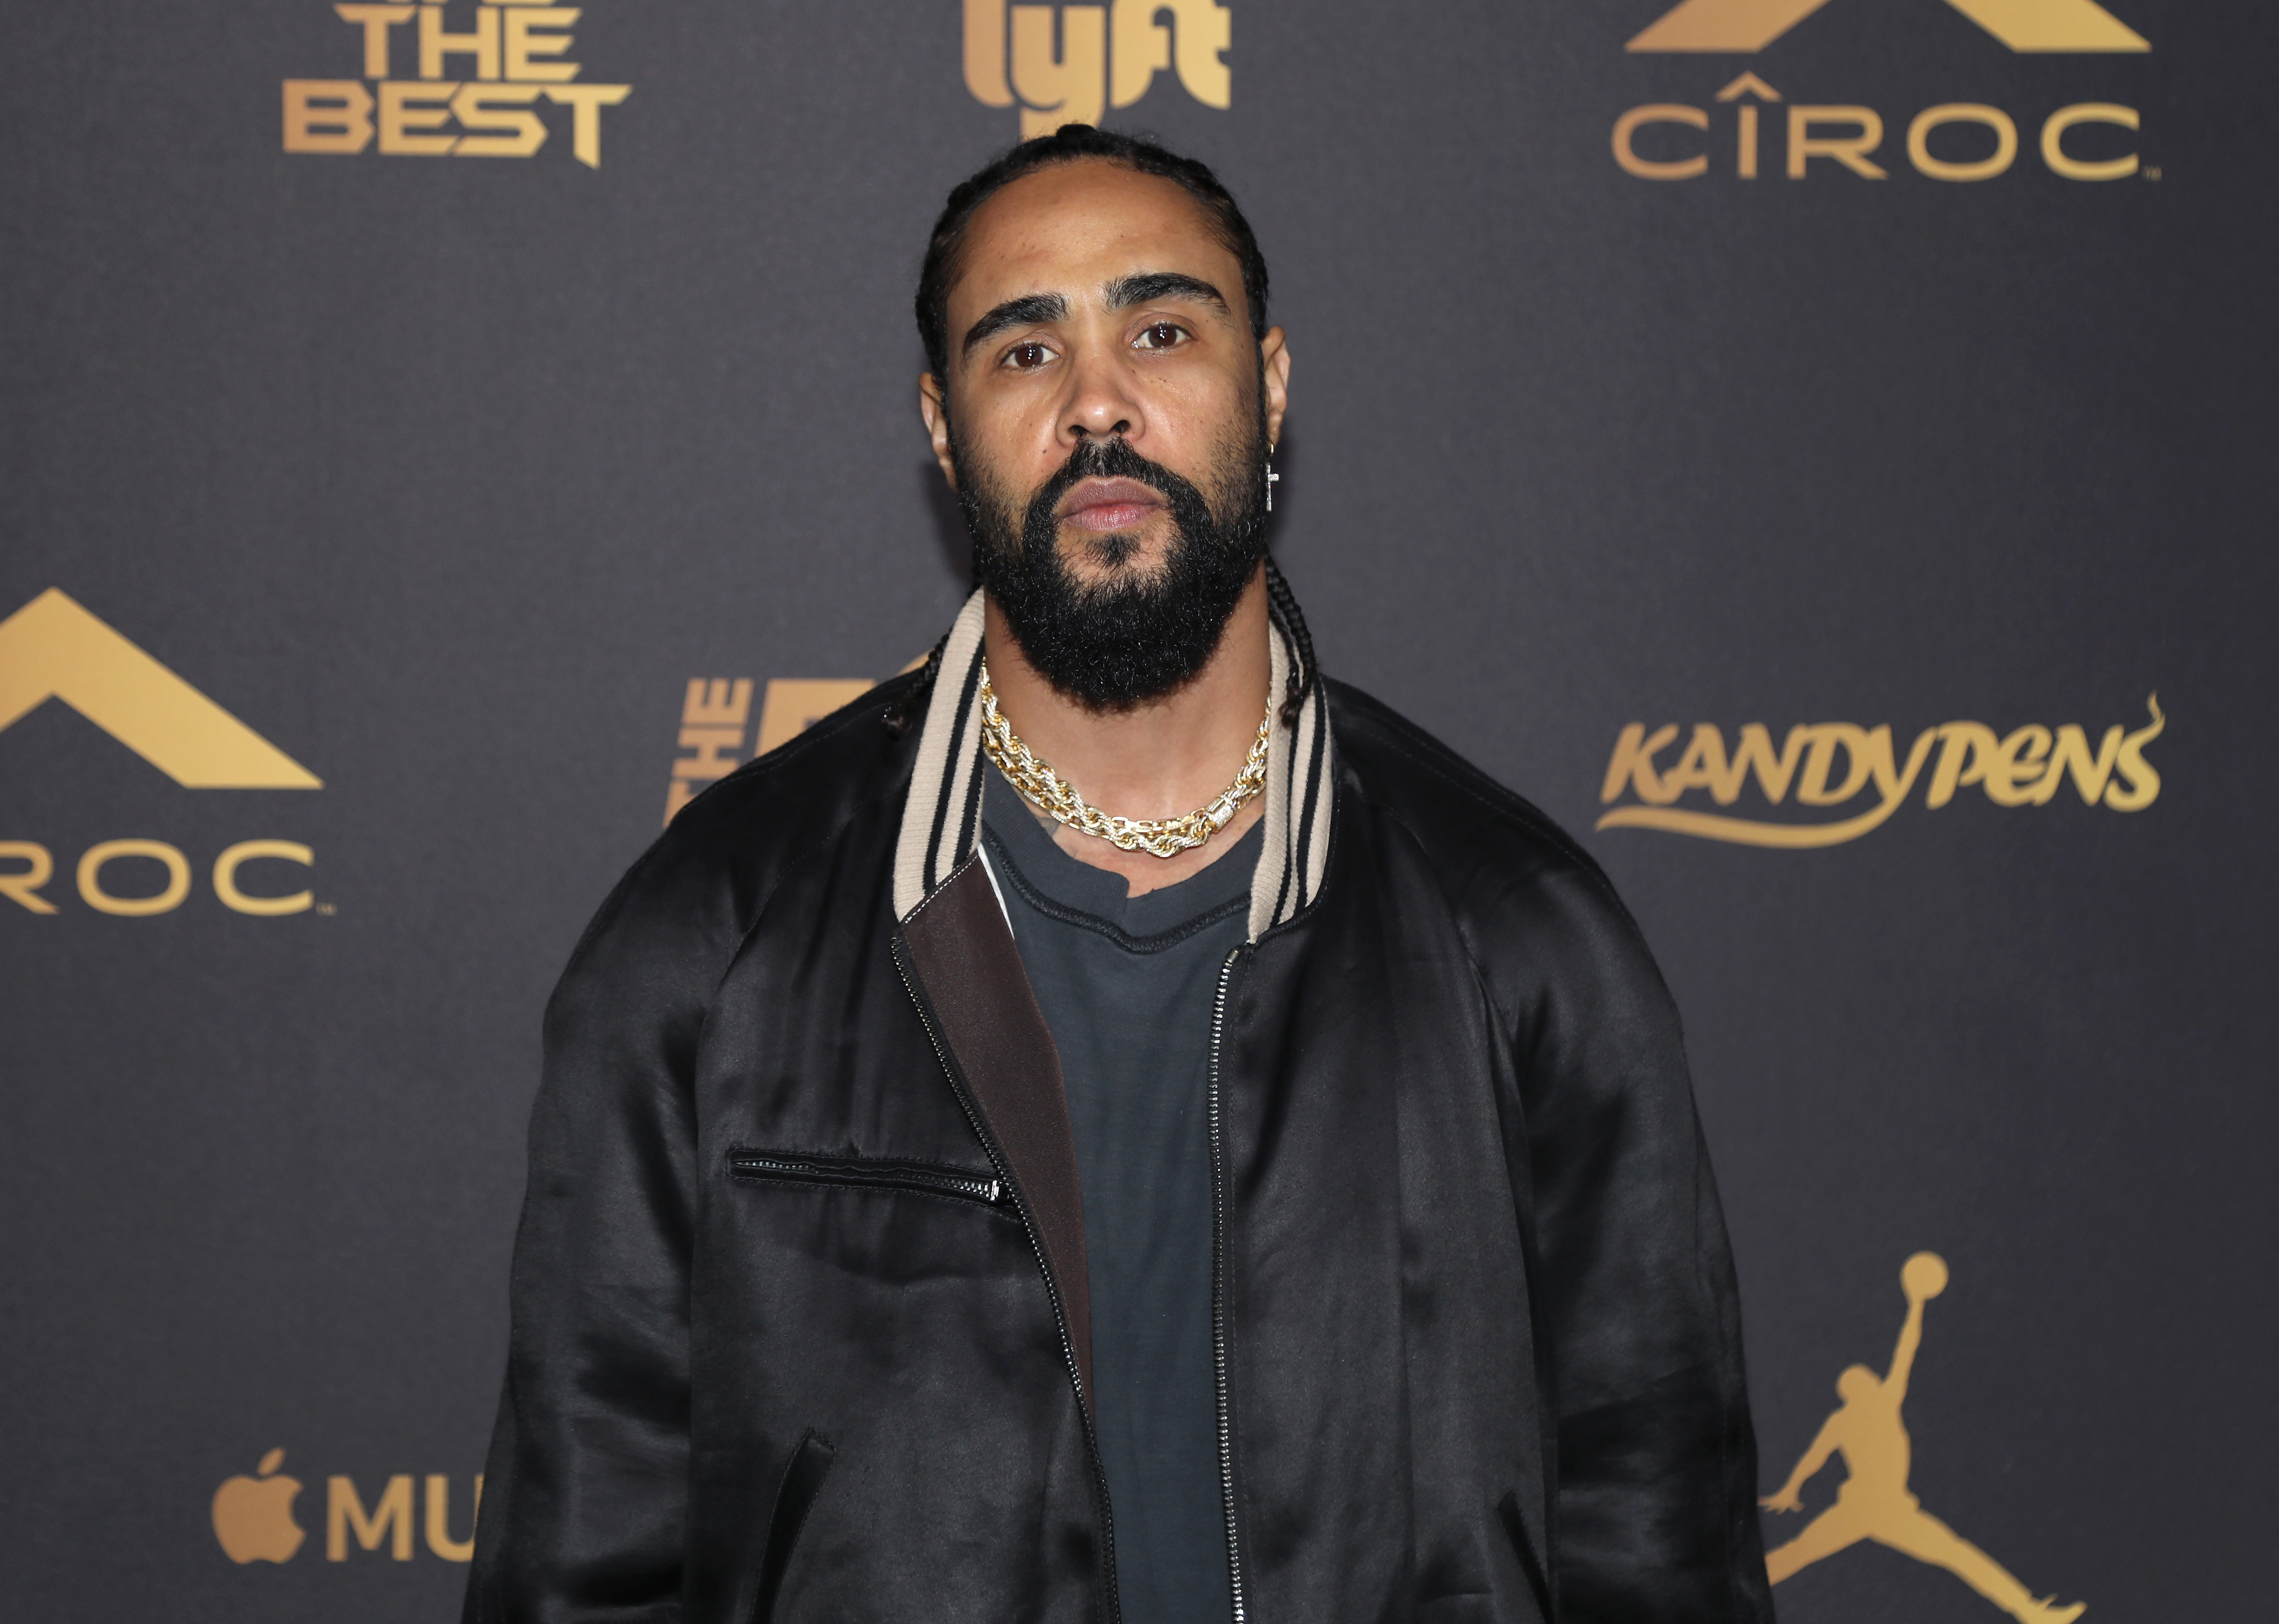 Rumored Colors of Jerry Lorenzo's Nike Air Fear of God 1 for 2019 –  Footwear News